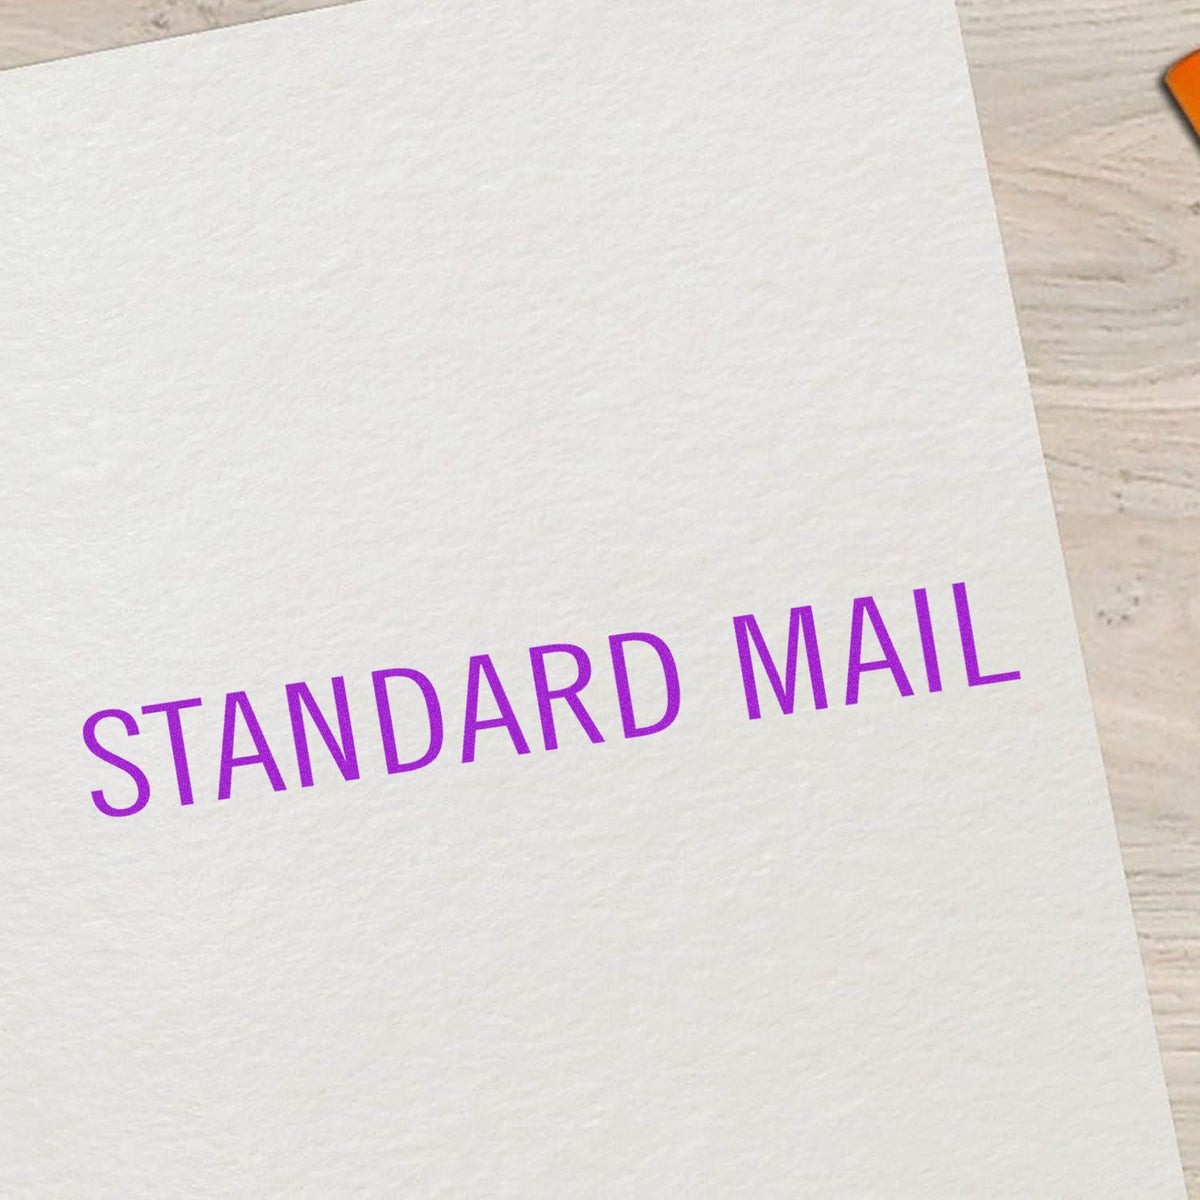 Standard Mail Rubber Stamp In Use